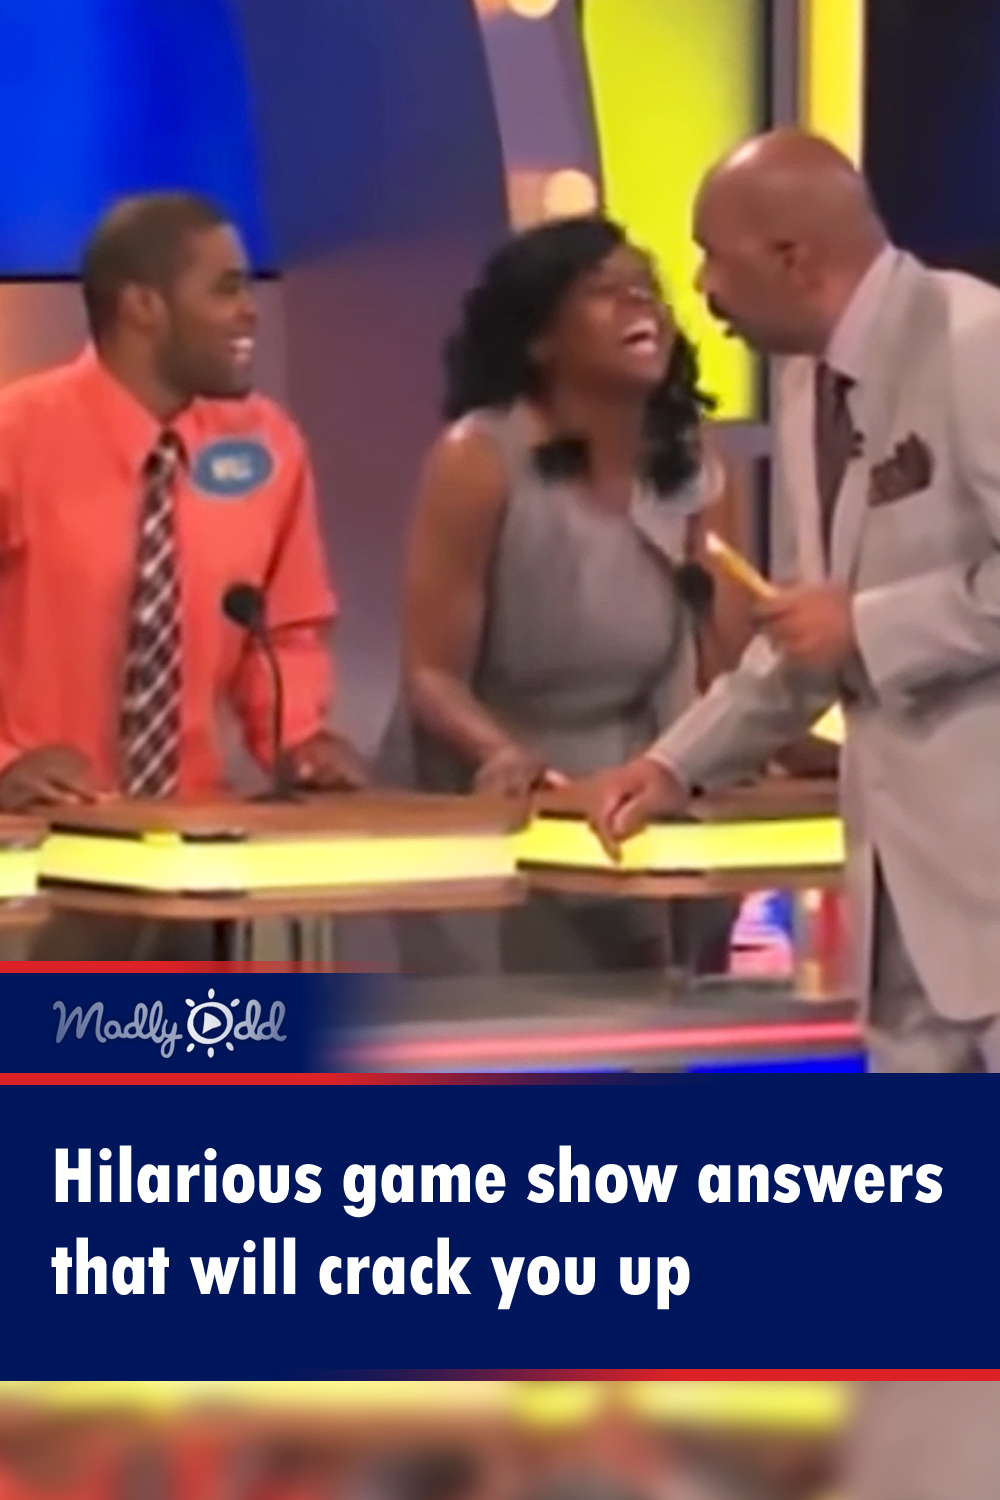 Hilarious game show answers that will crack you up